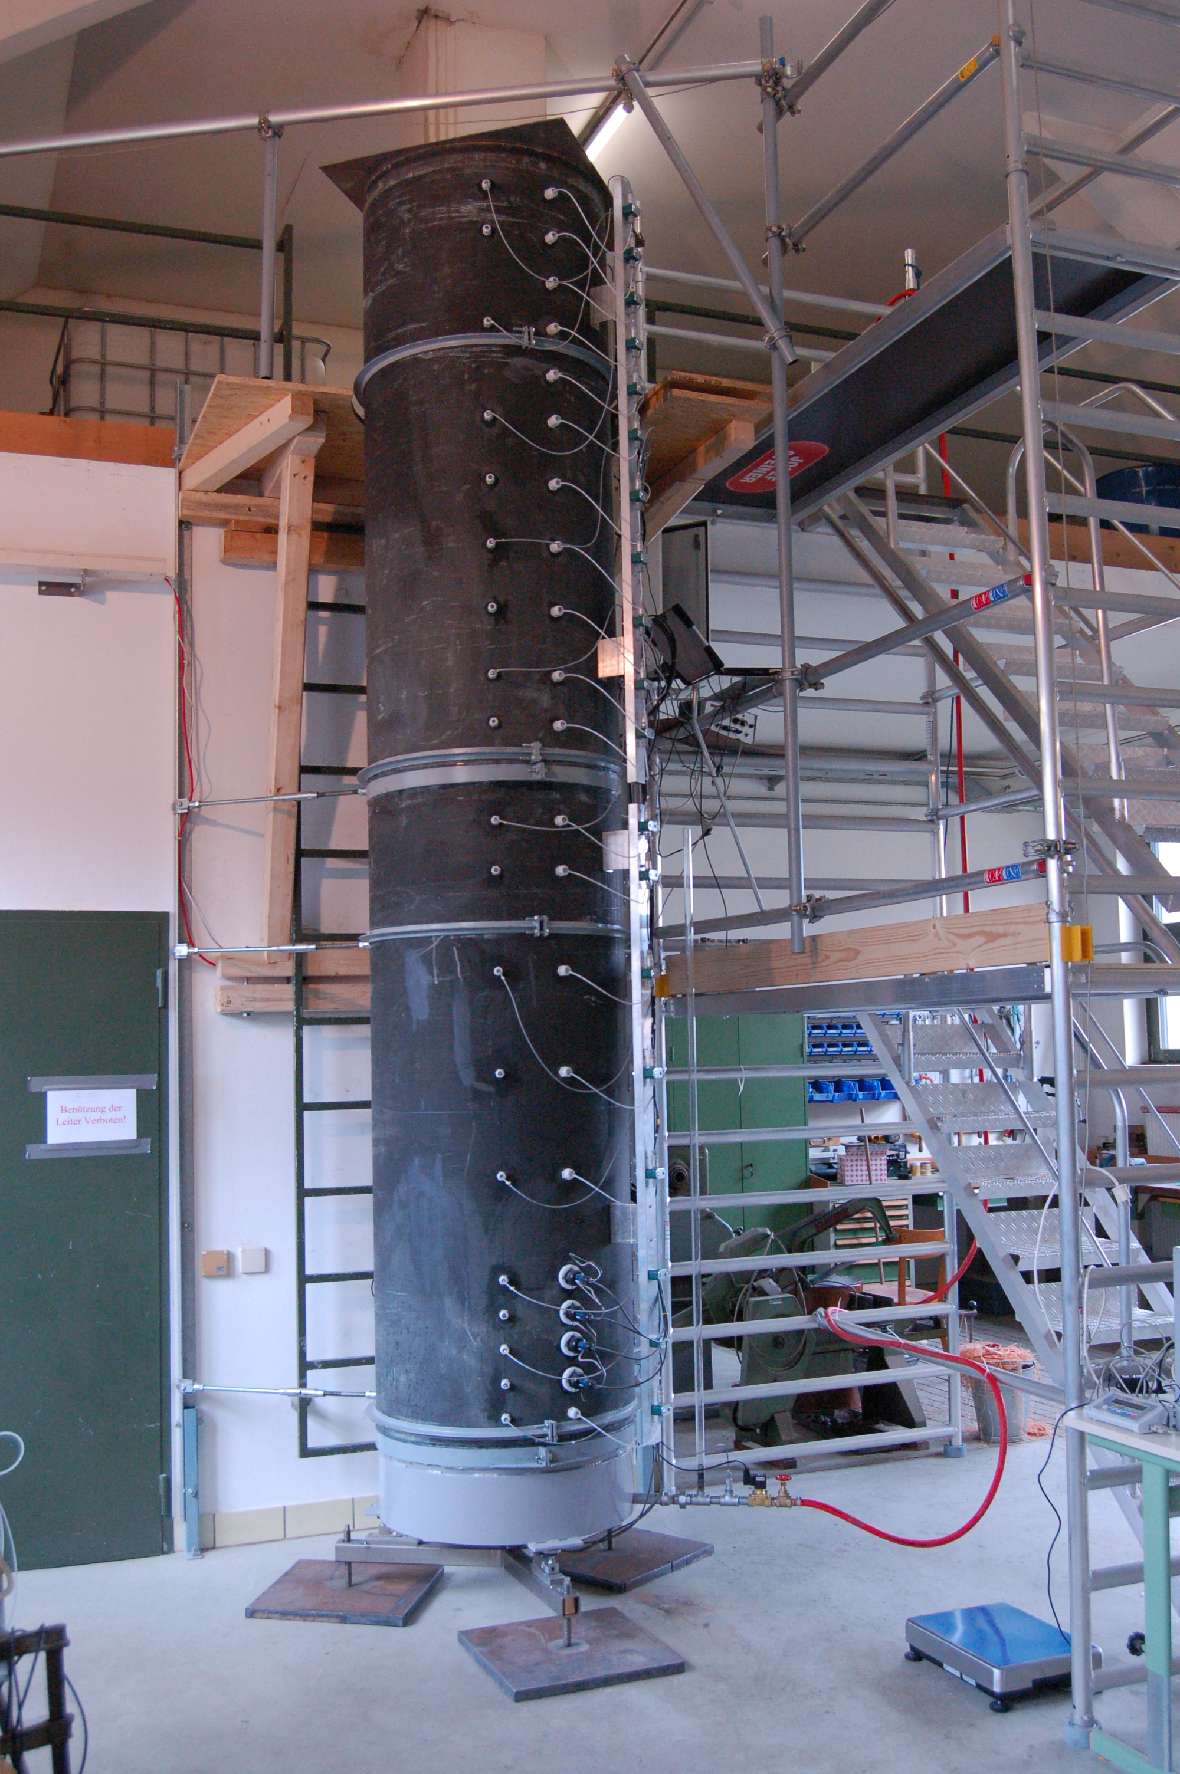 Here the picture shows a finished indoor lysimeter from the outside. Next to it is a scaffold with stairs to reach the top of the 4 m high cylinder. On the left you can see a door.